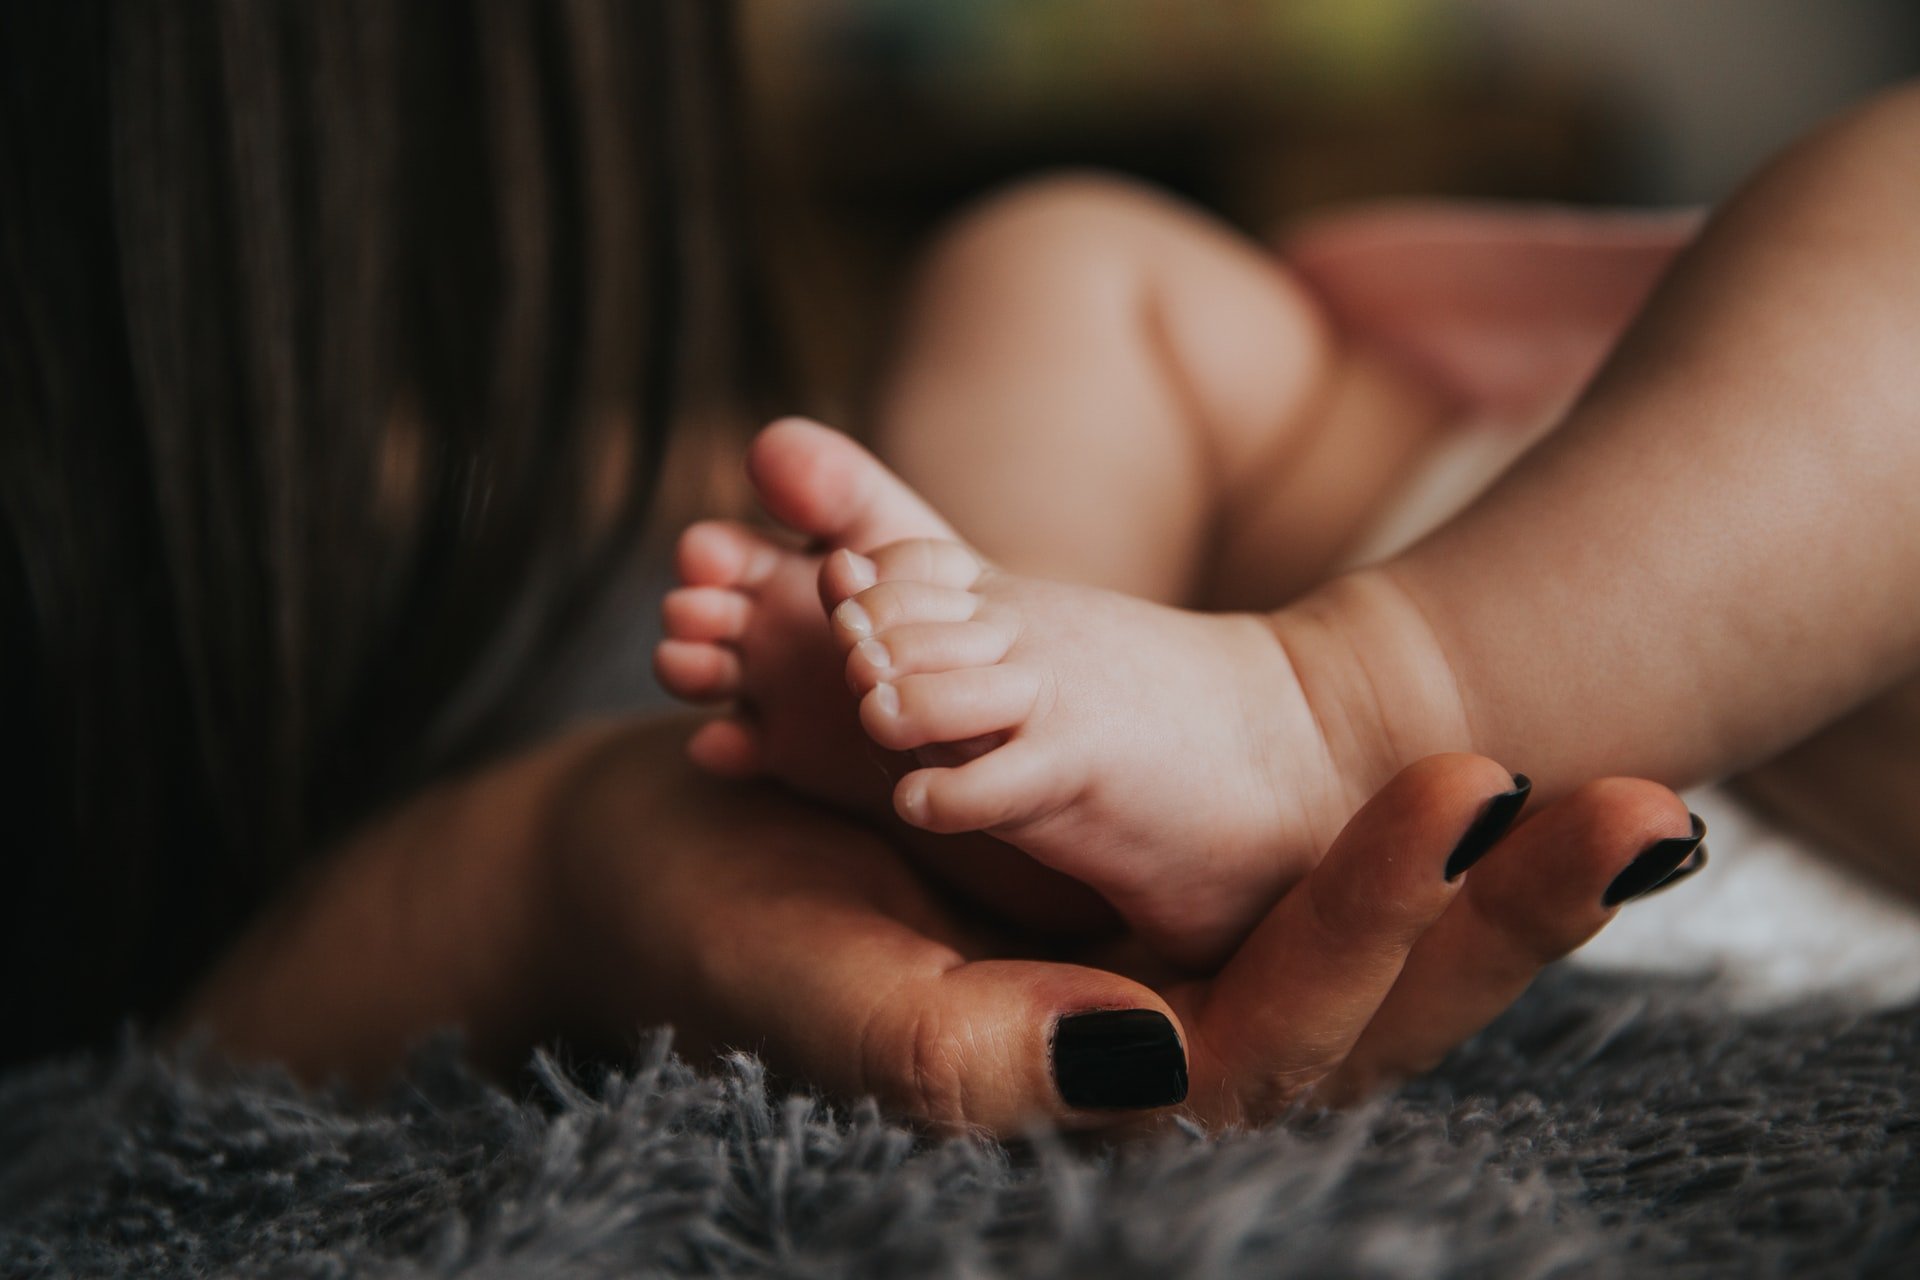 The woman gave her child up for adoption | Source: Unsplash